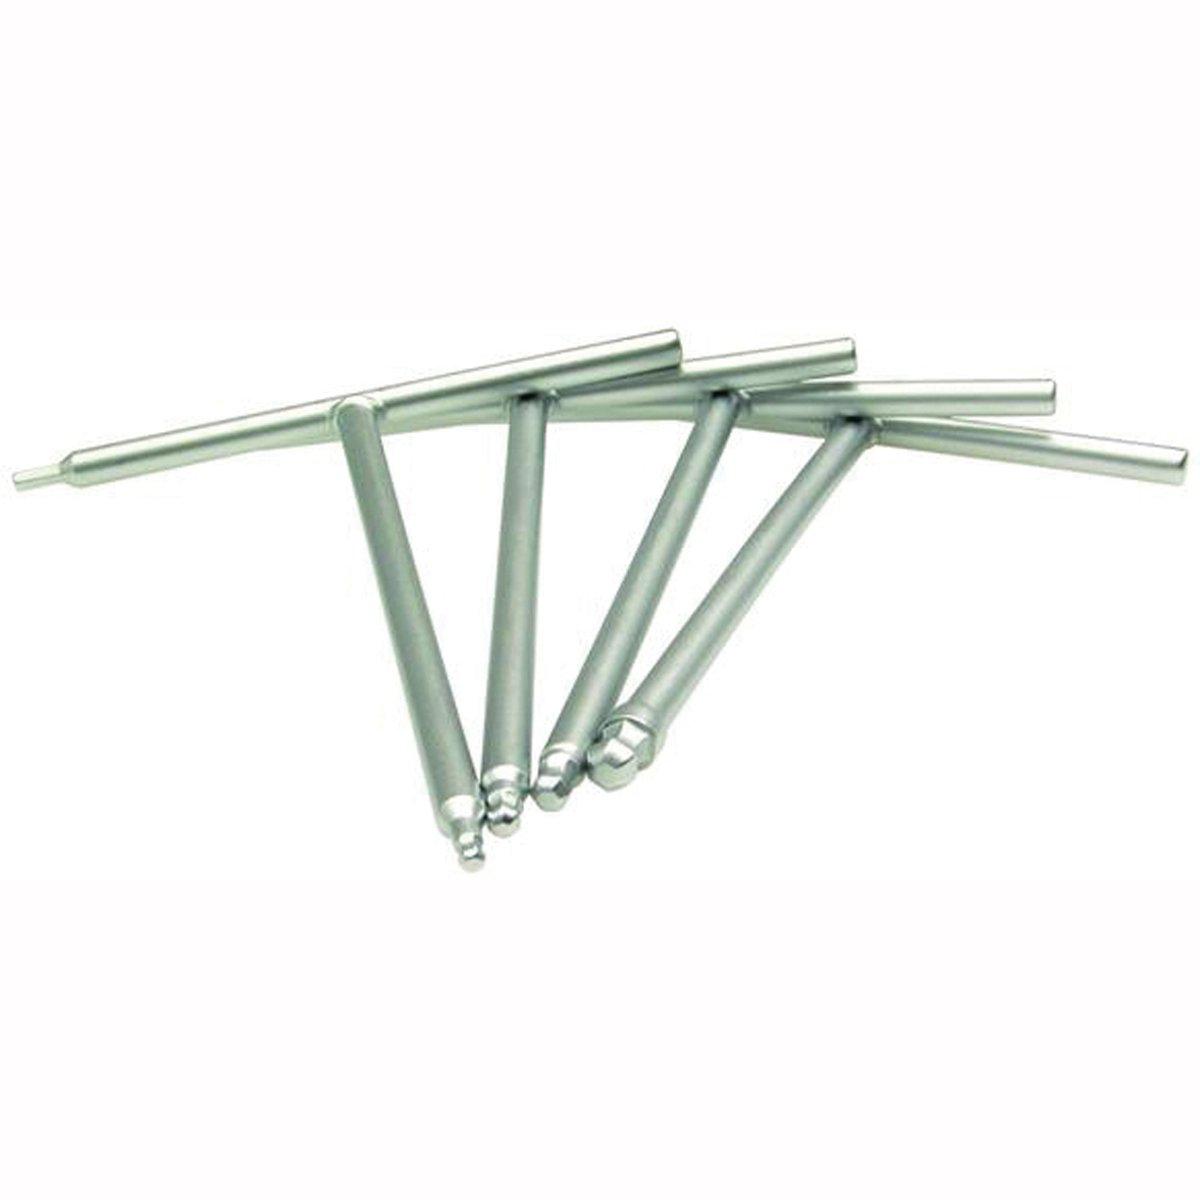 Motion Pro T-Handle Ball-End Hex Keys - Set of 4 - Browse our range of Care: Tools - getgearedshop 